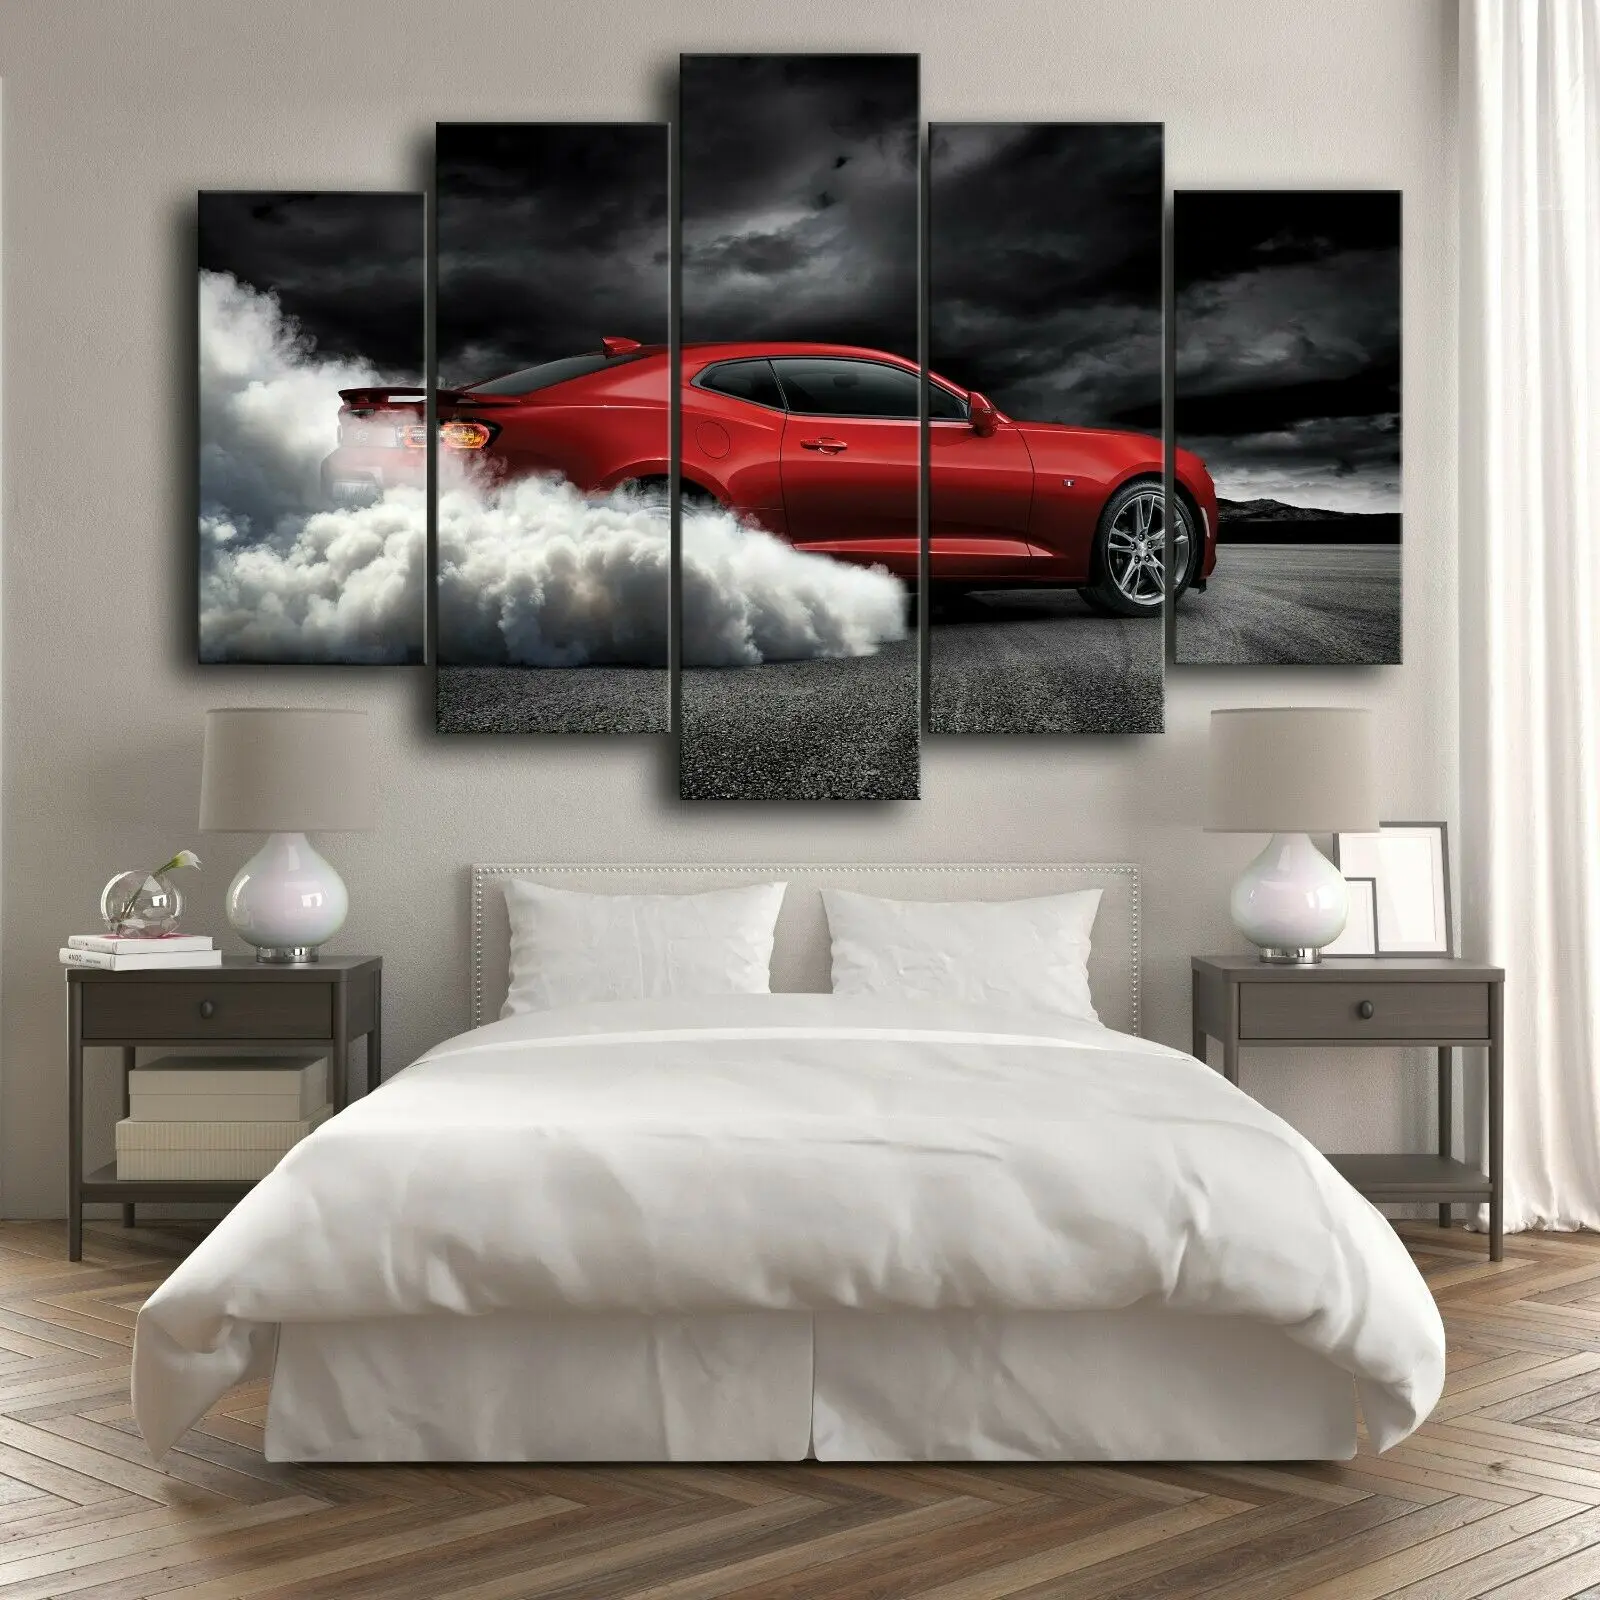 

Chevrolet Camaro Smoke Sports Car 5 Pcs Canvas Pictures Print Wall Art Canvas Paintings Wall Decor for Living Room No Framed